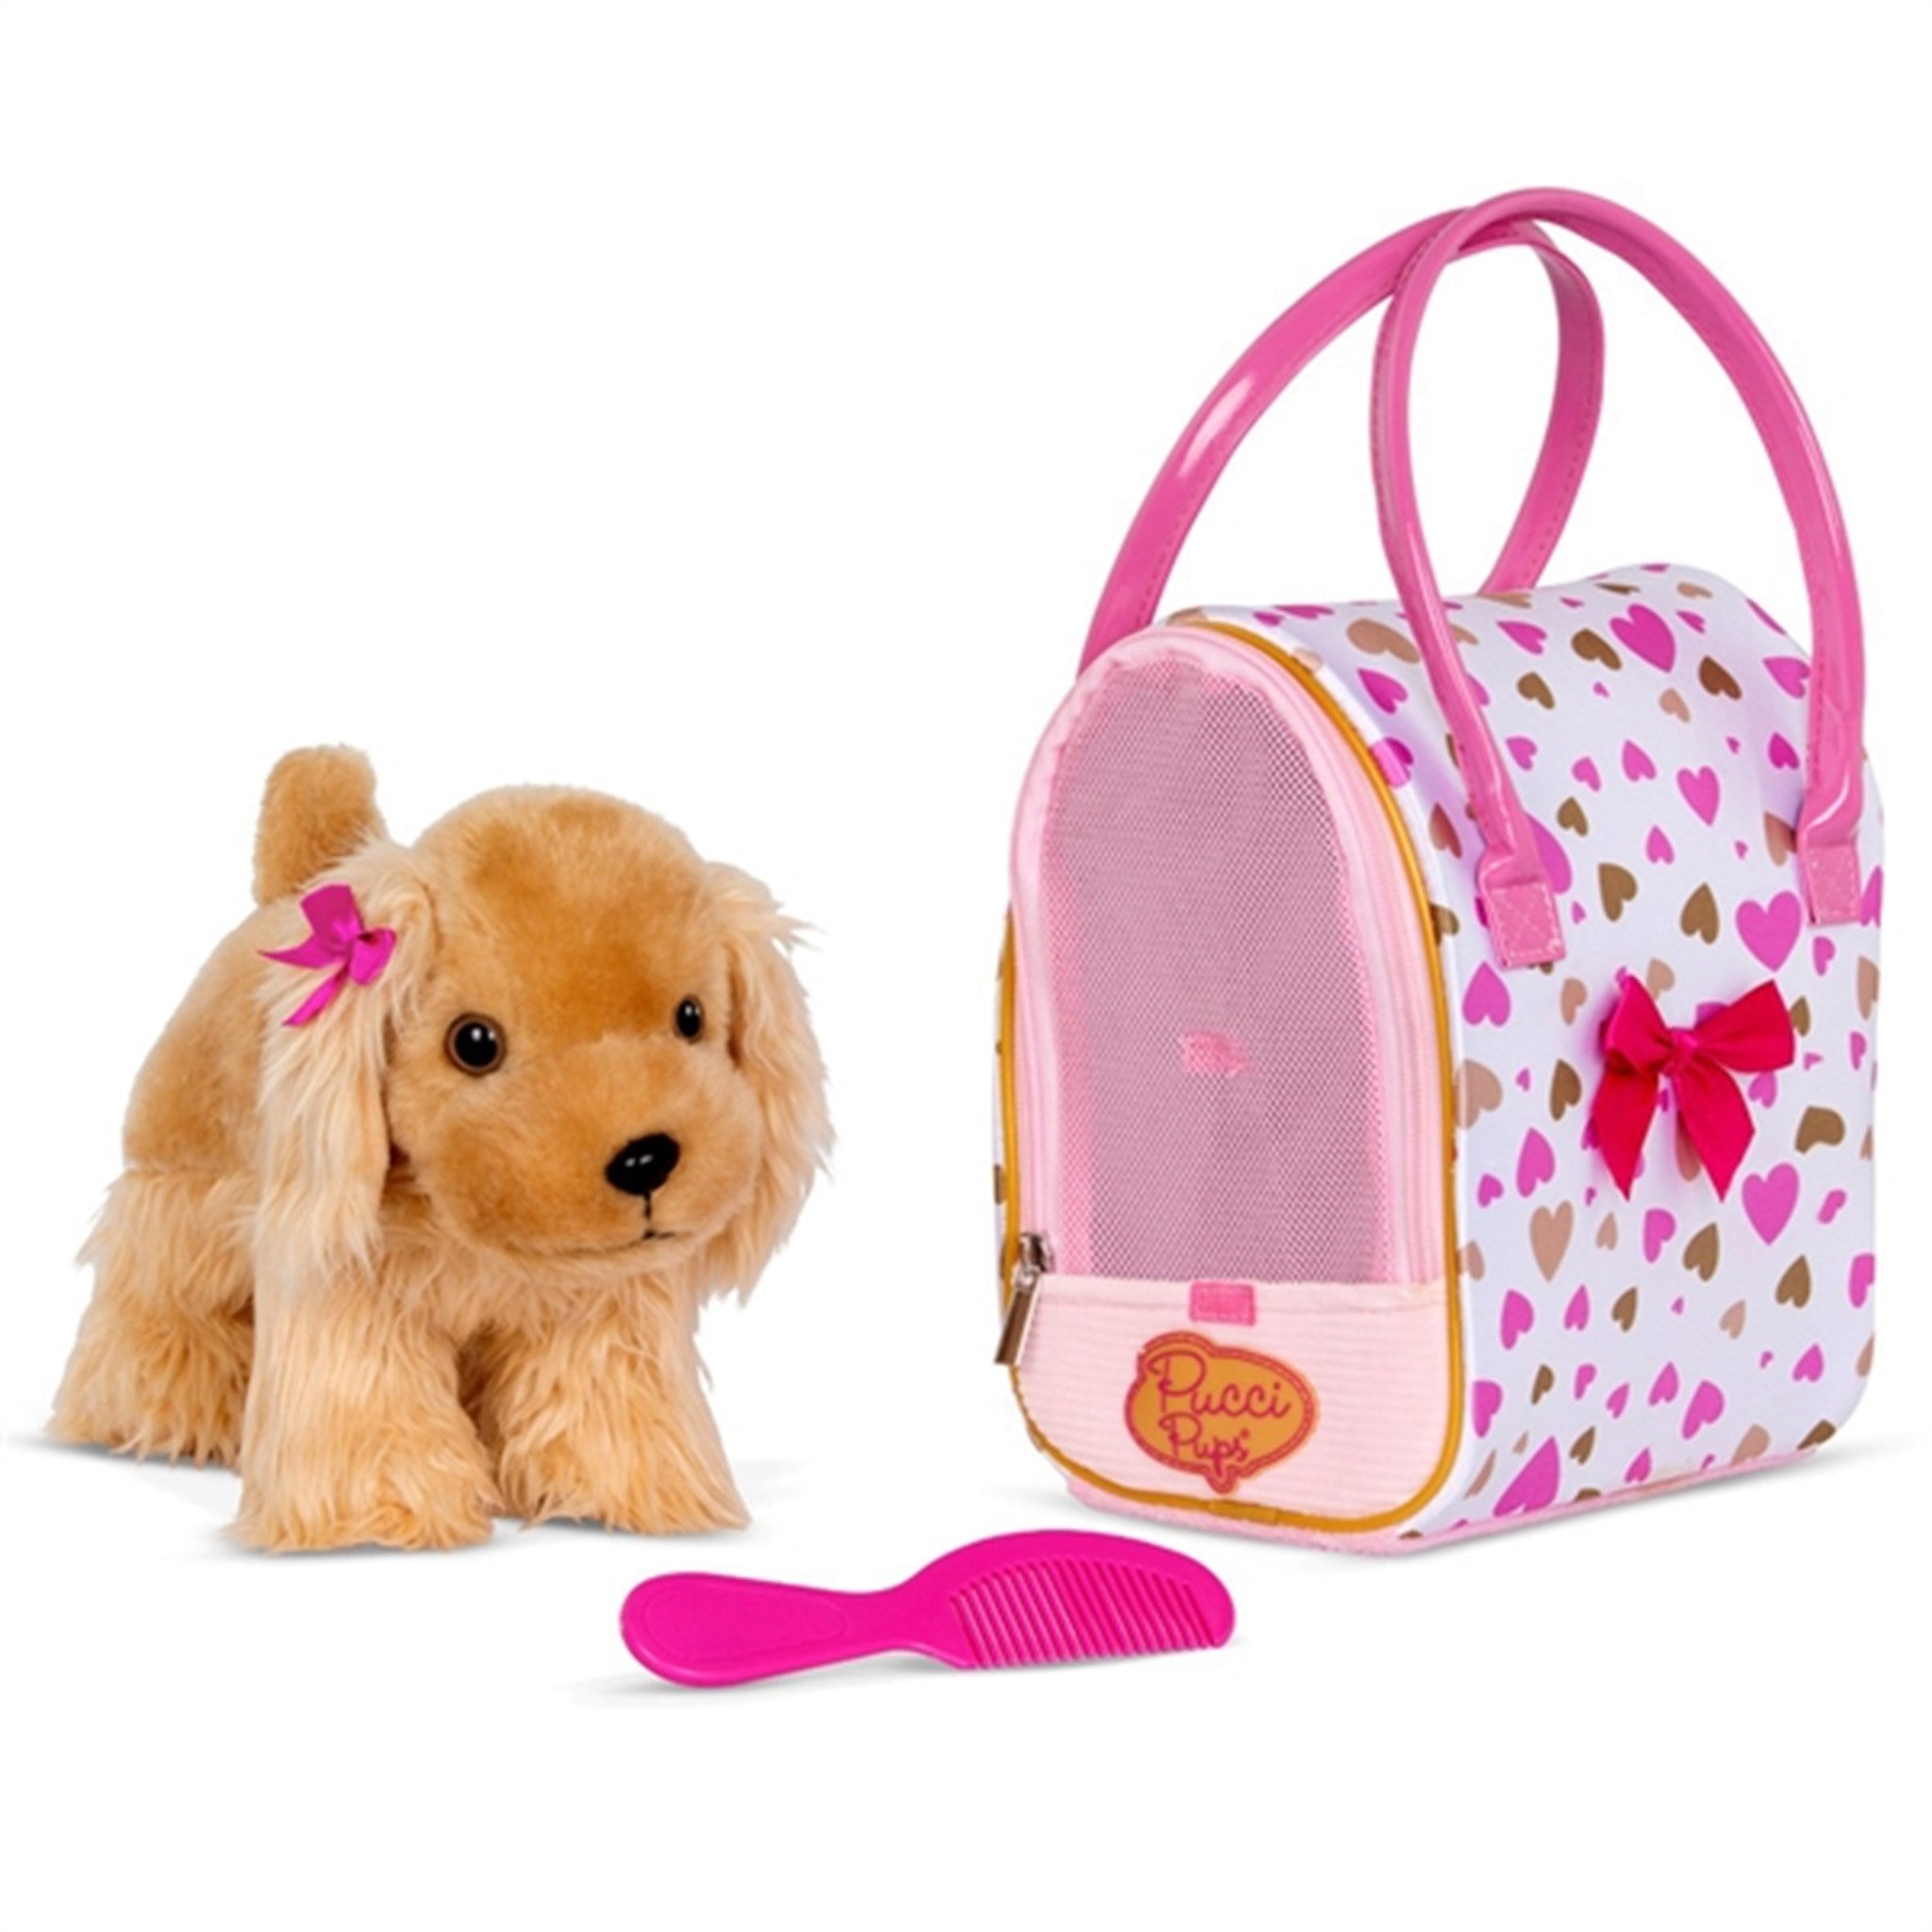 Pucci Pups Dog in Bag Gold & Pink Hearts